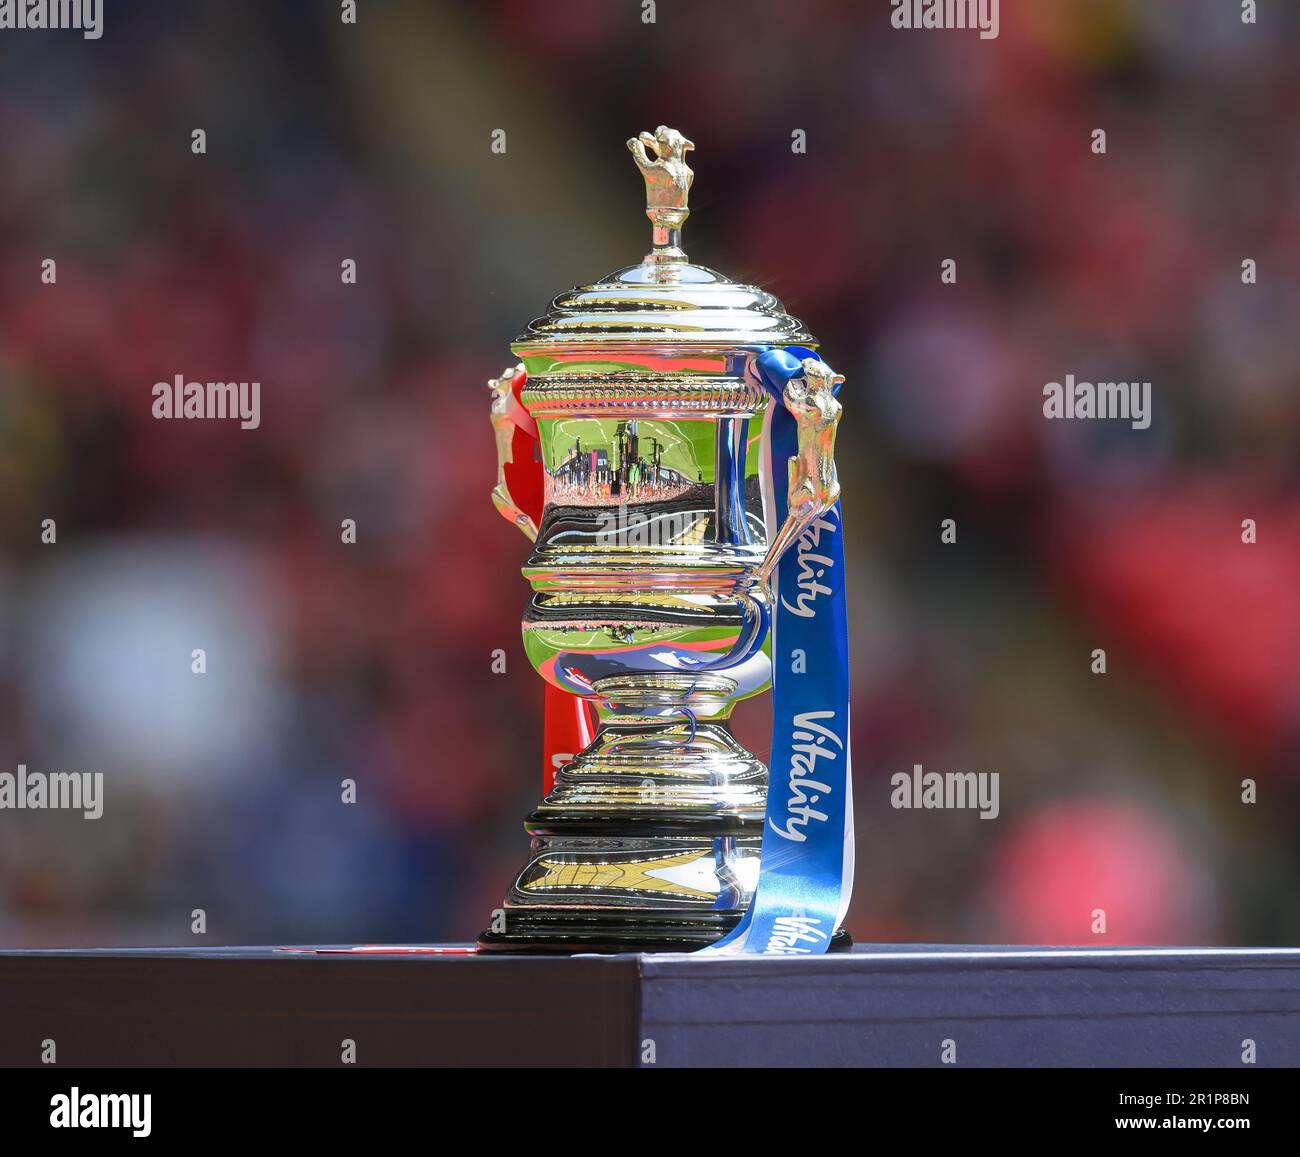 Londres, Royaume-Uni. 14th mai 2023. 14 mai 2023 - Chelsea / Manchester United - Vitality Women's FA Cup - final - Stade Wembley la Vitality Women's FA Cup est exposée à la finale au stade Wembley, Londres. Crédit photo : Mark pain/Alamy Live News Banque D'Images